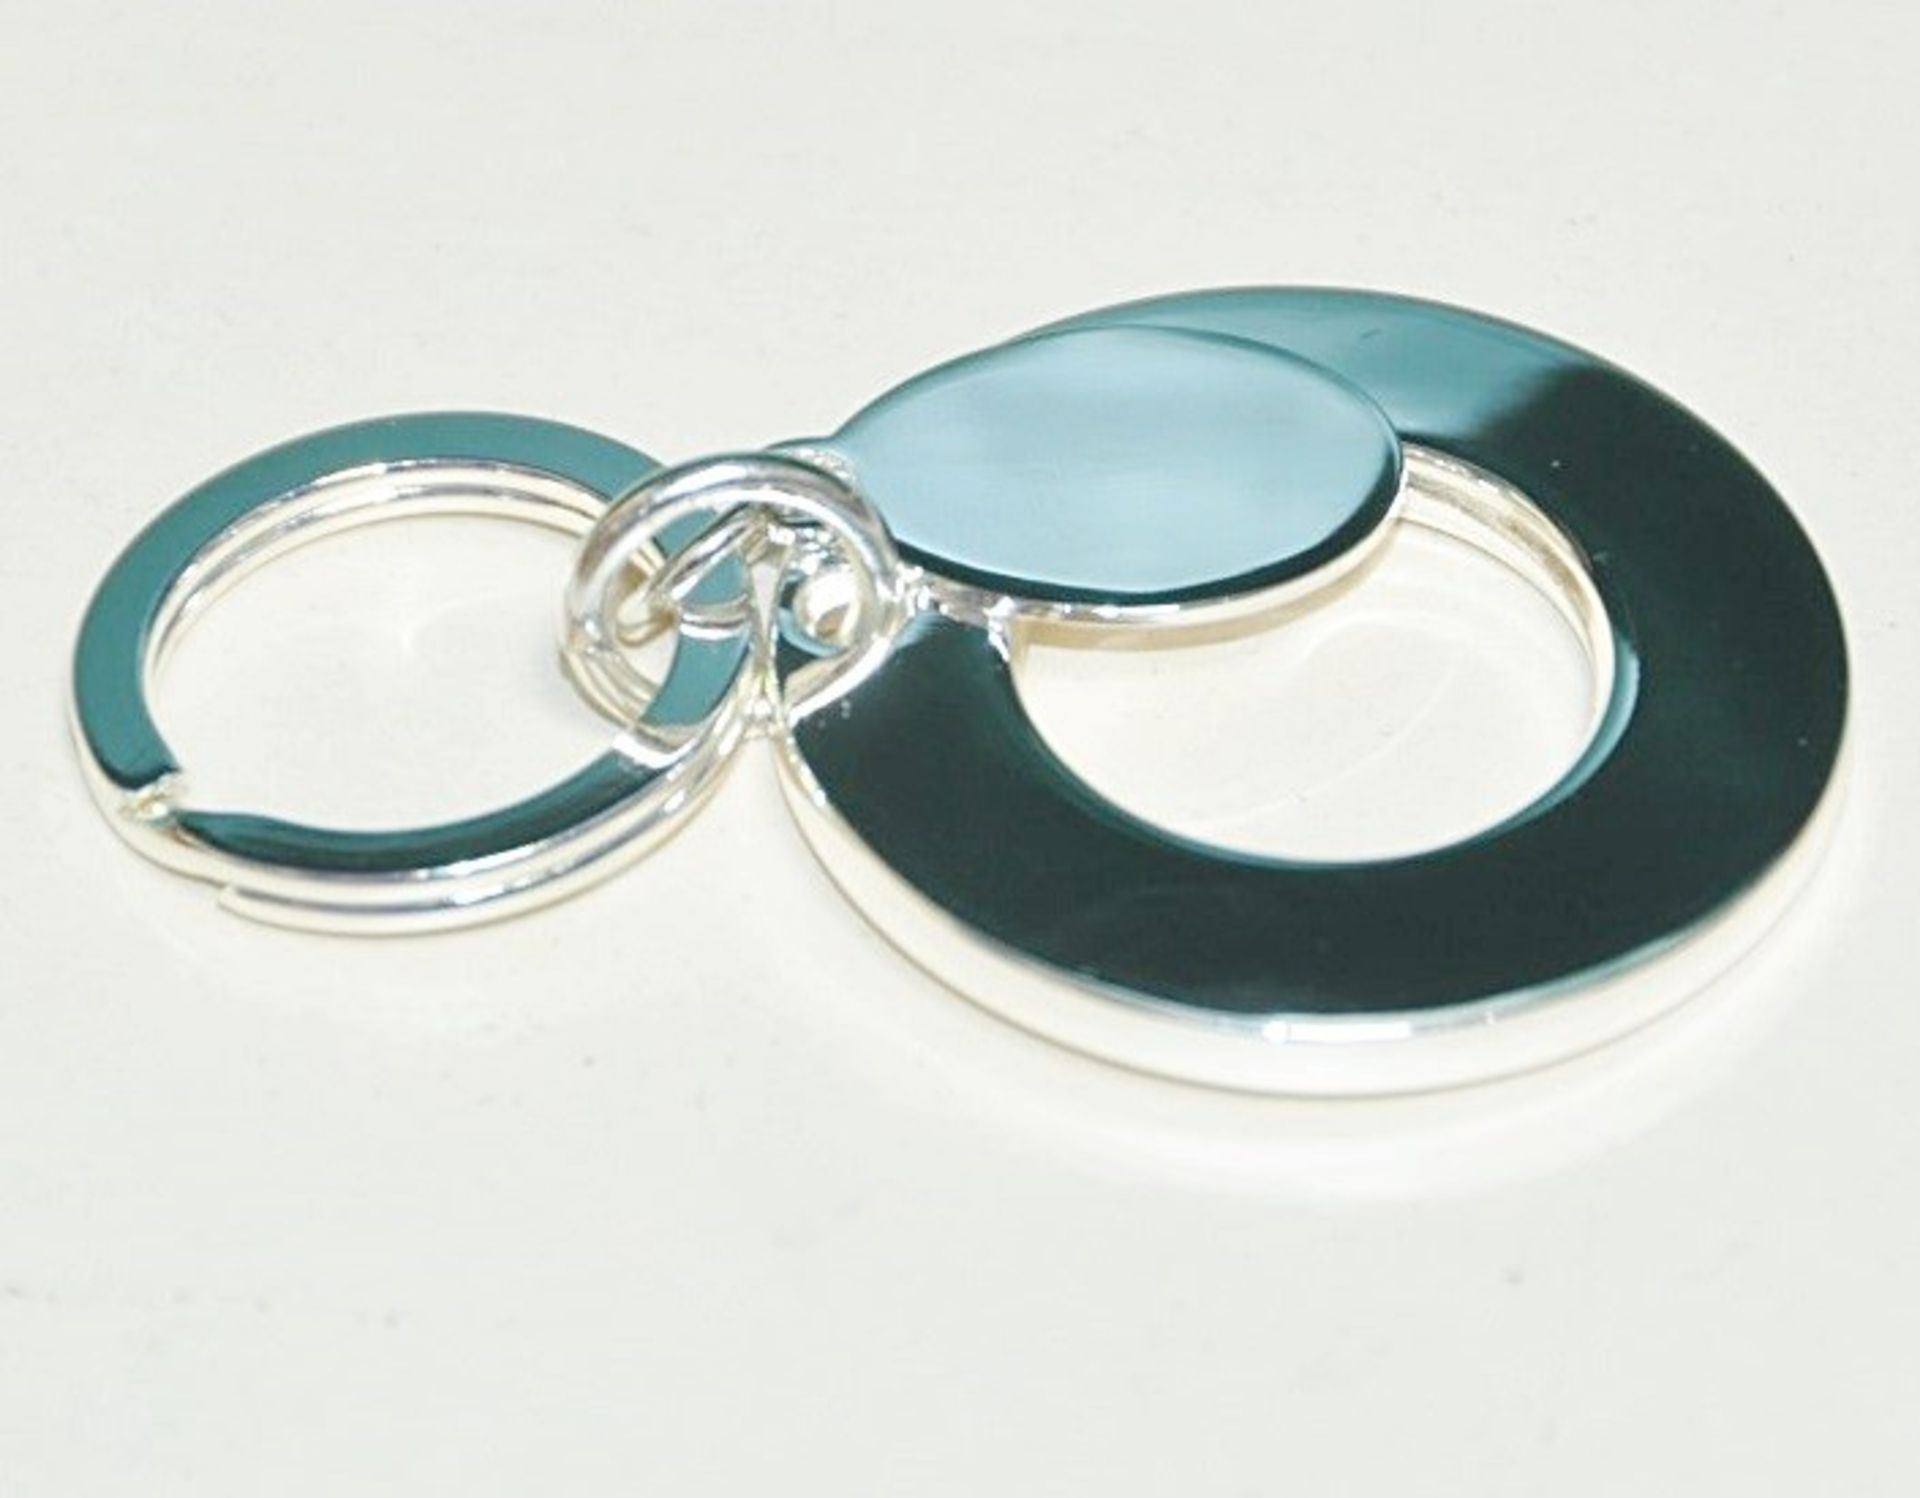 10 x Silver Plated Key Rings By ICE London - Design: SOLAR - MADE WITH "SWAROVSKI¨ ELEMENTS - Luxury - Image 2 of 6